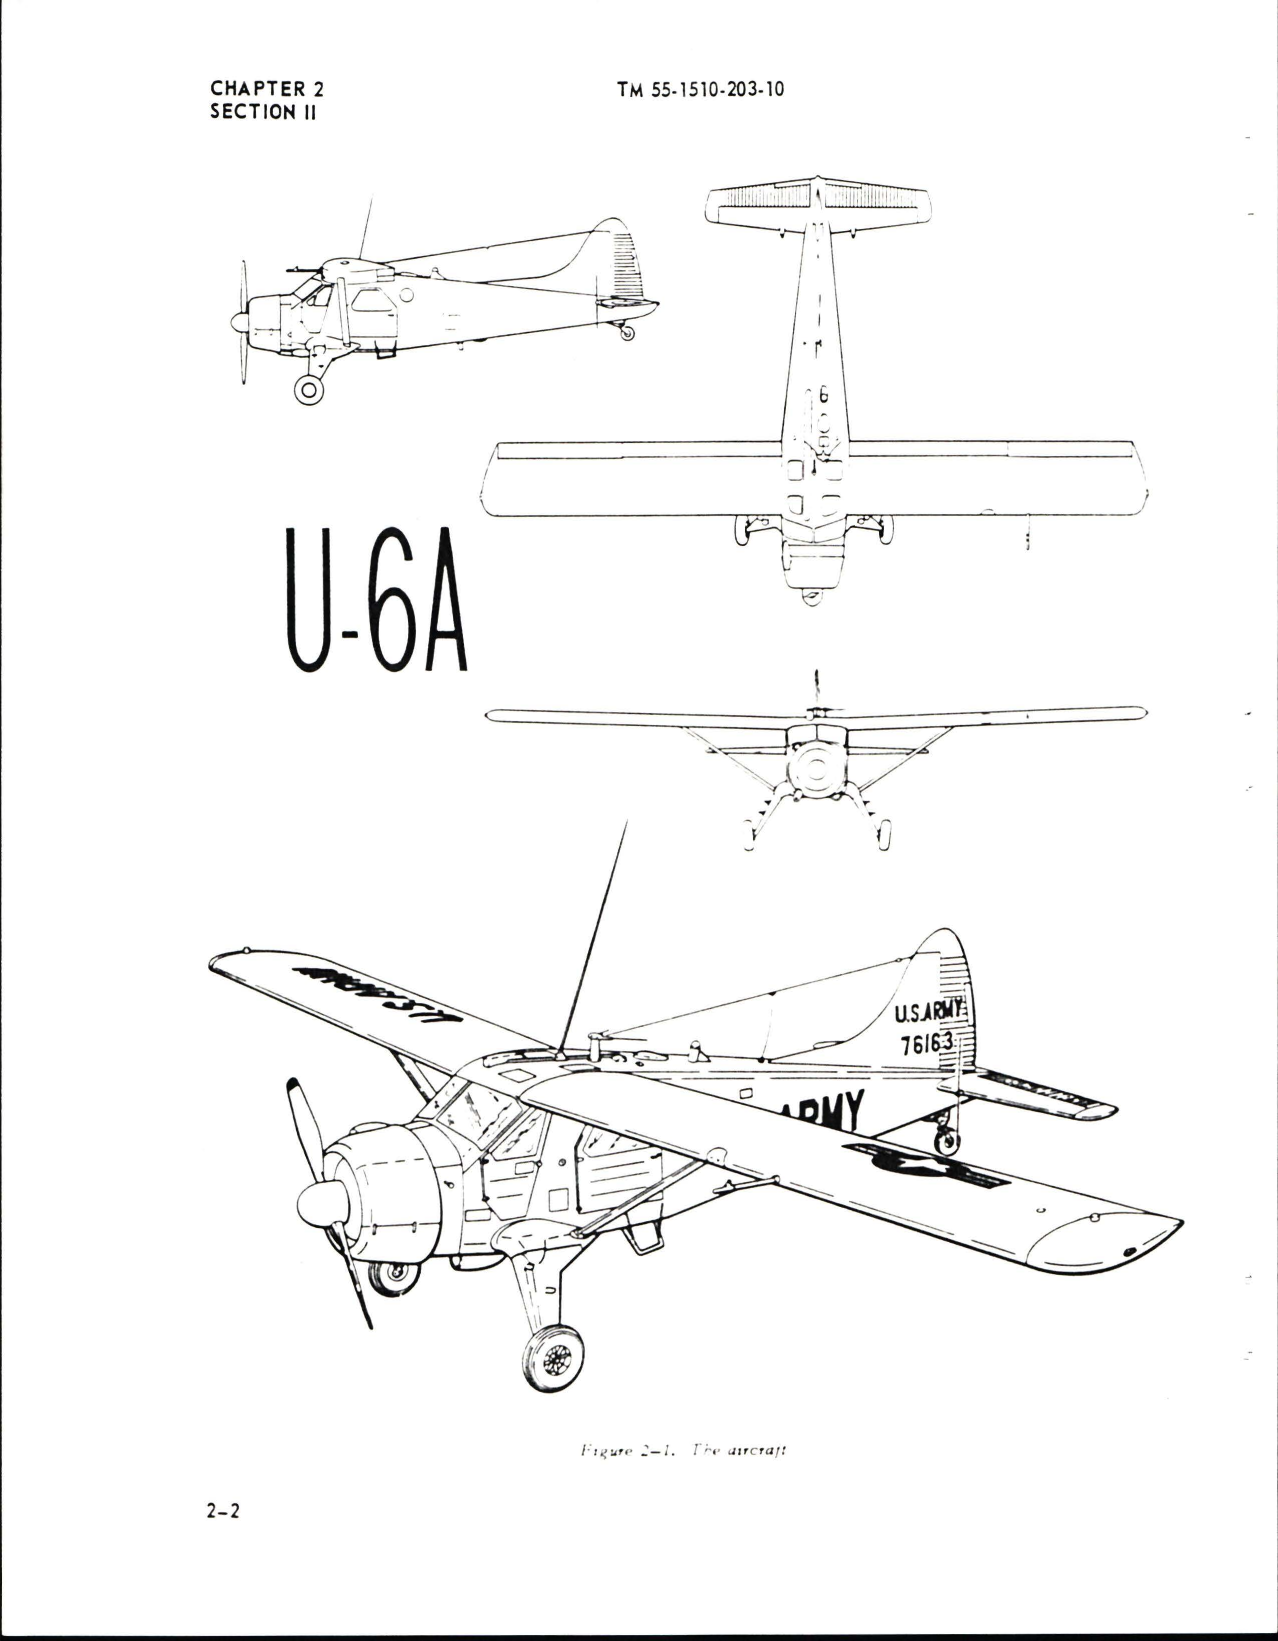 Sample page 8 from AirCorps Library document: Operator's Manual for U-6A